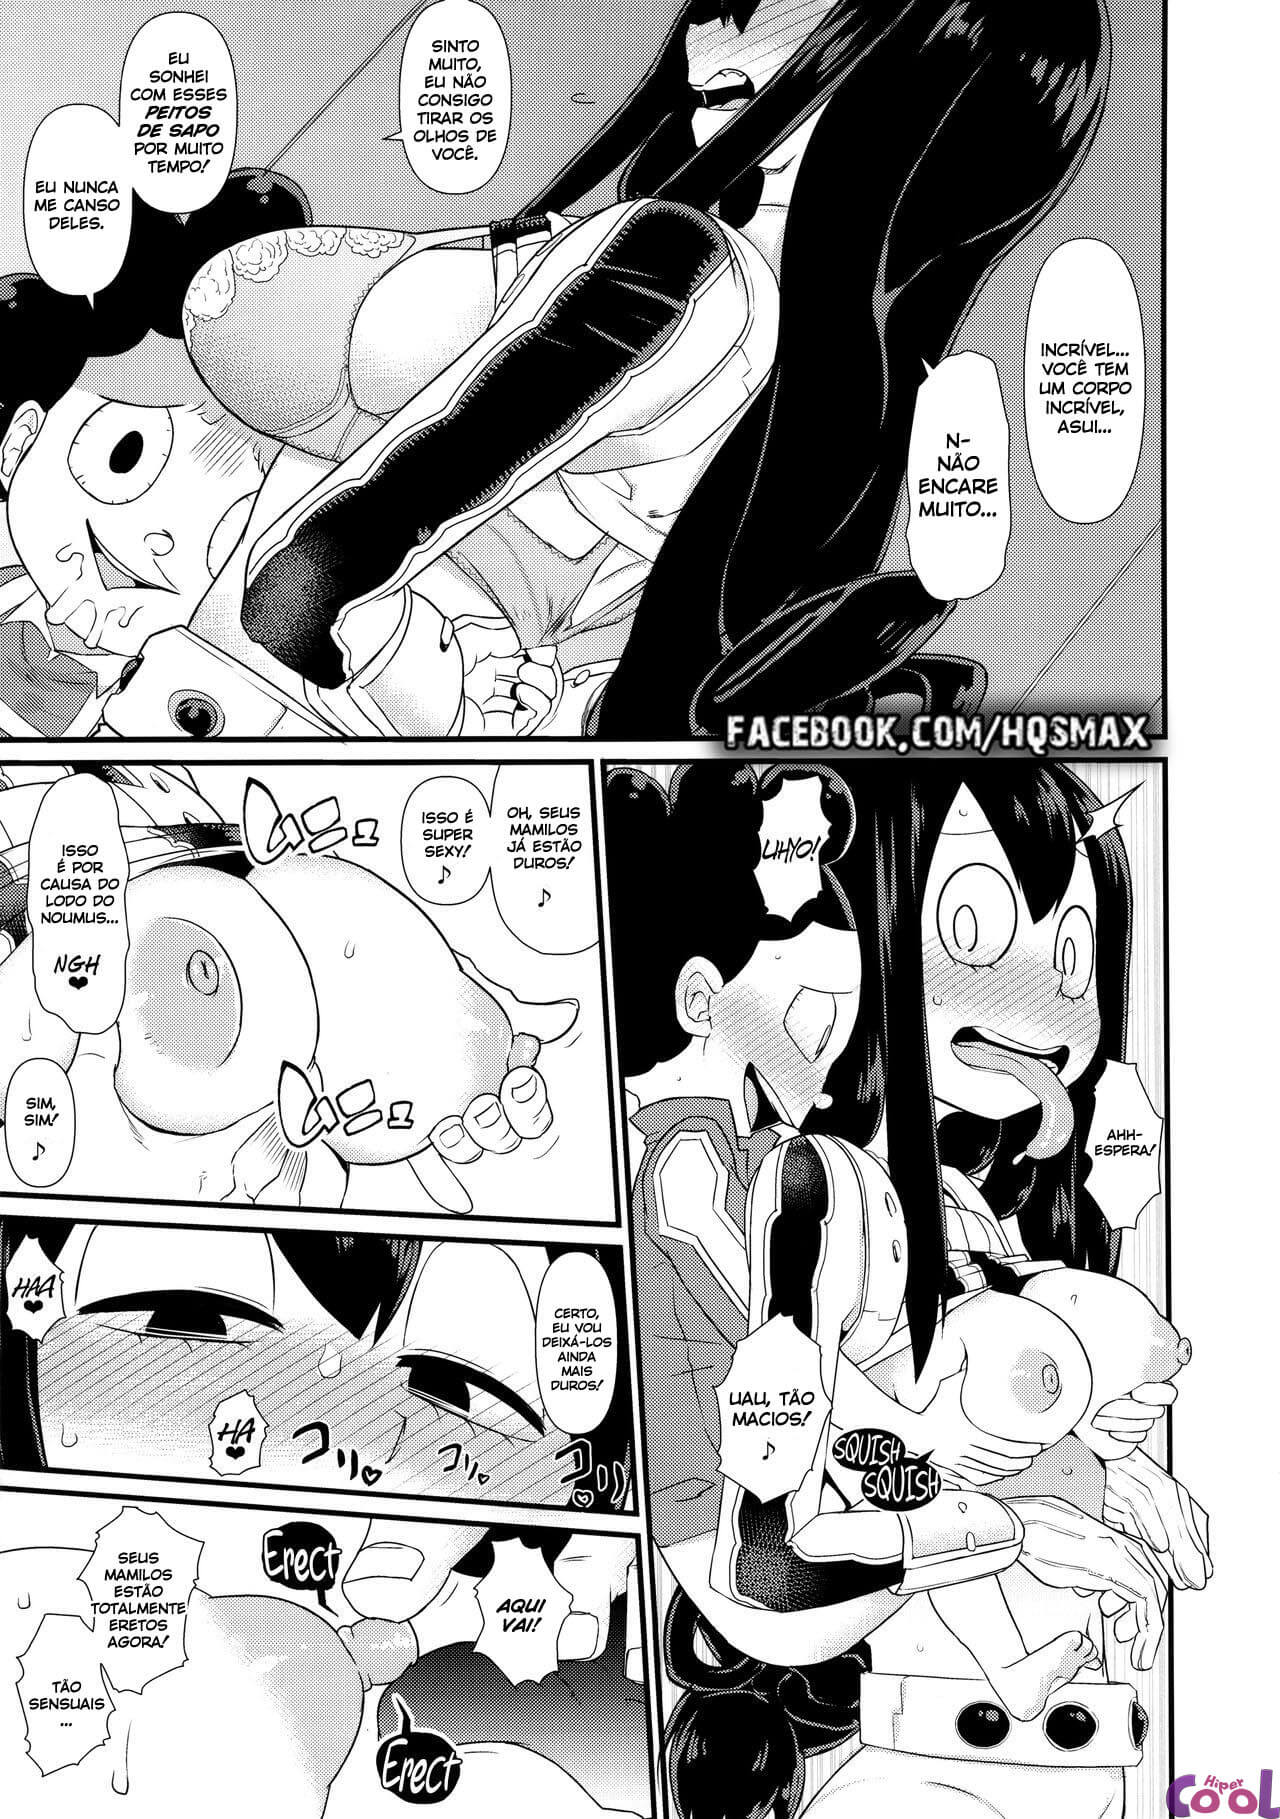 froppy-chapter-01-page-11.jpg